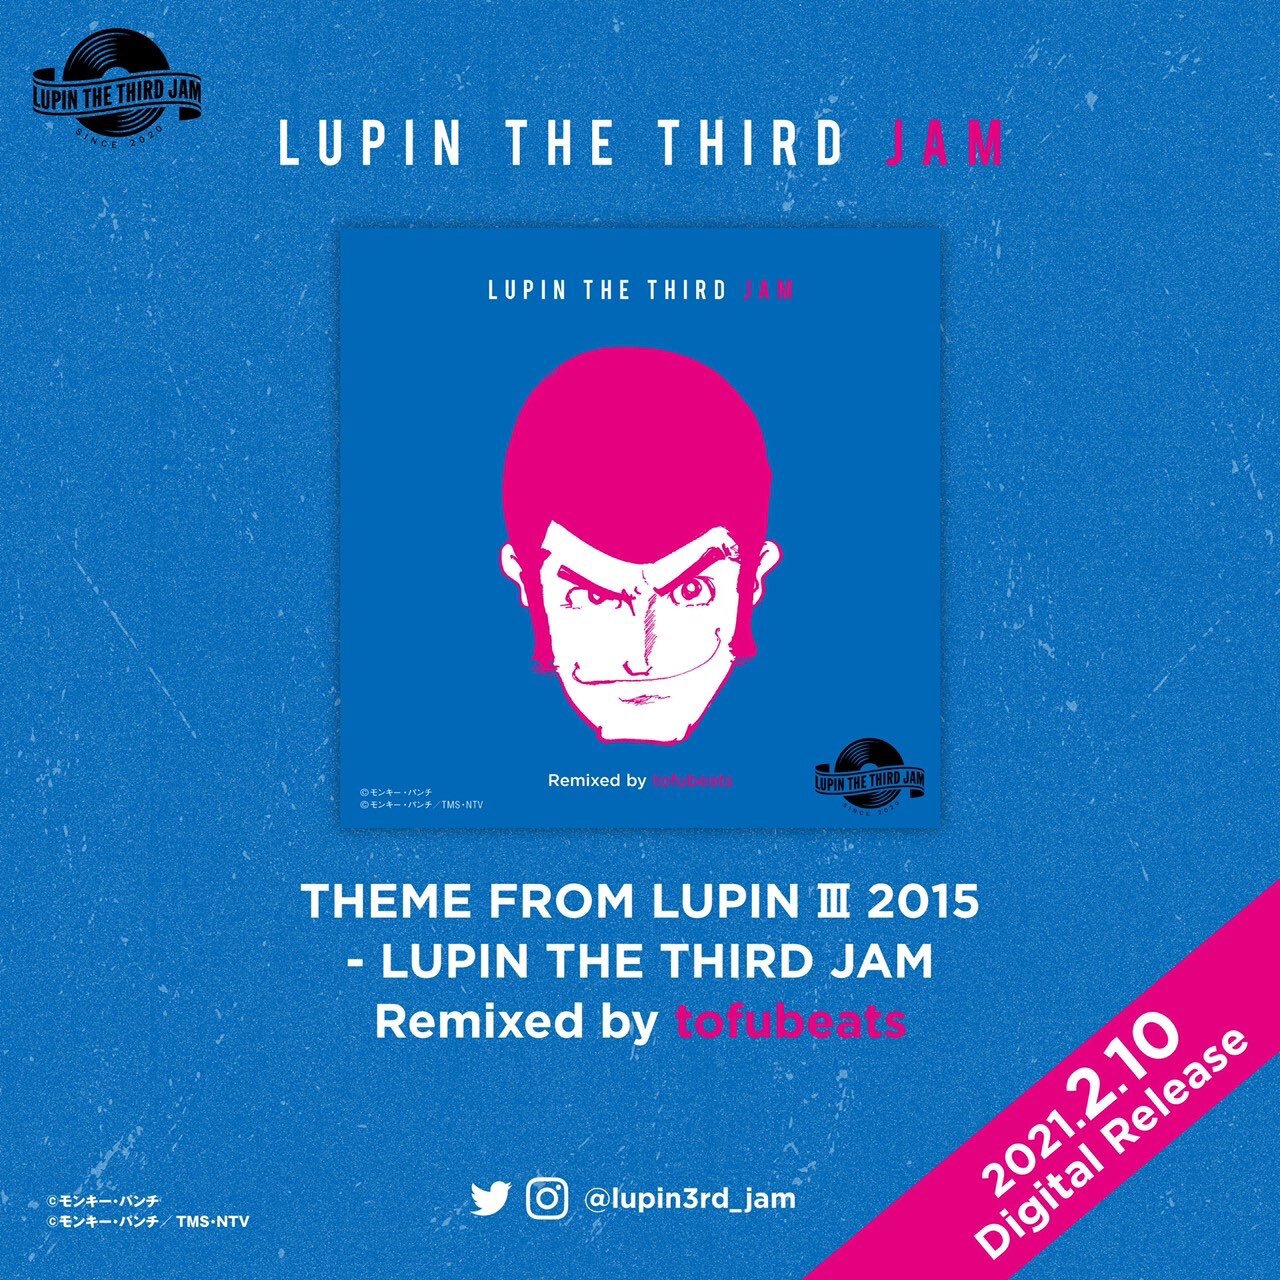 Lupin III: Jam to get full album release [Updated!] — Lupin Central